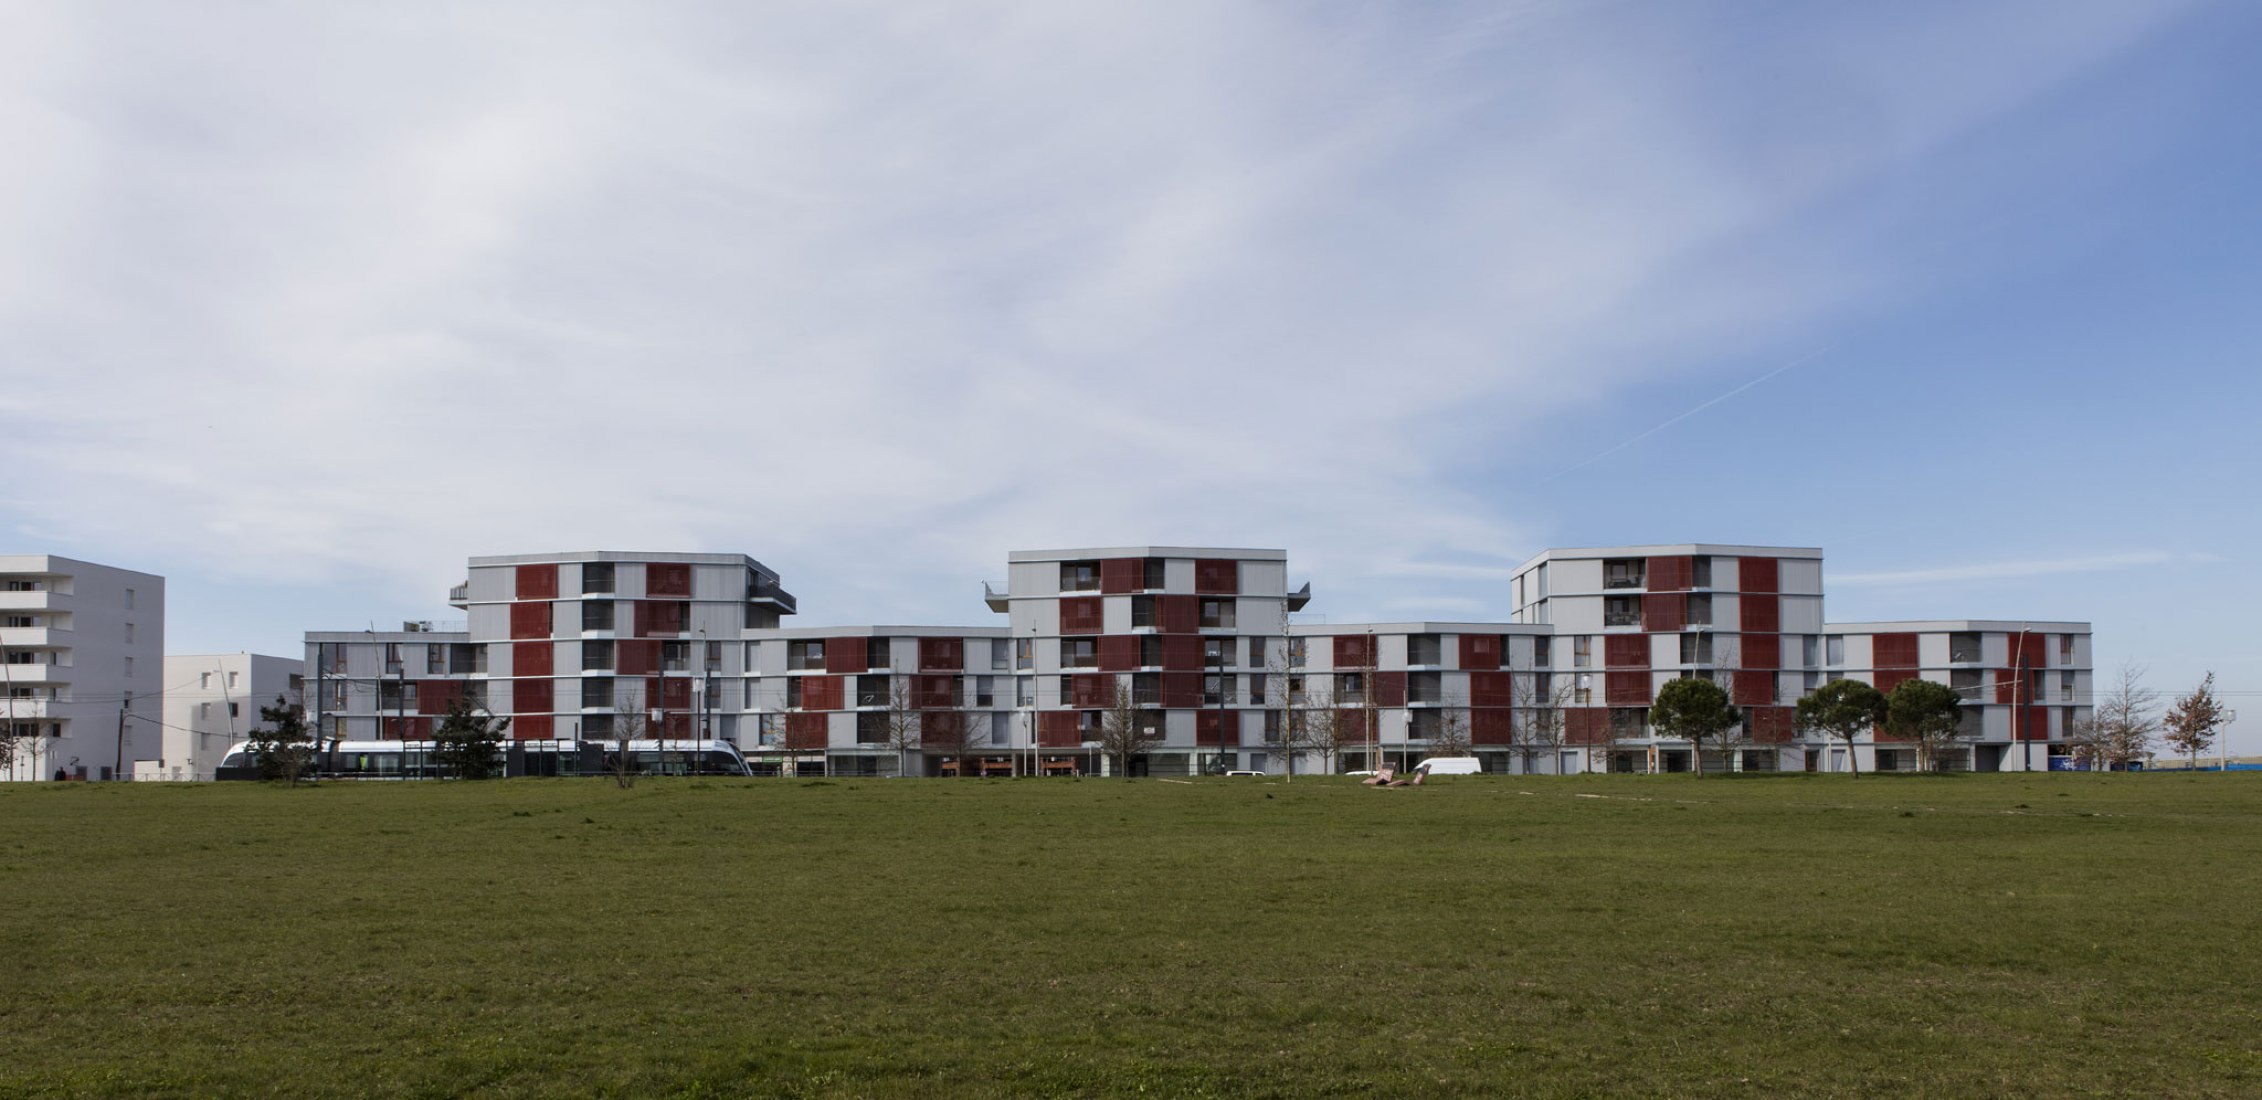 Housing at Zac Andromede-Beauzelle by Francisco Mangado. Photograph by Juan Rodríguez